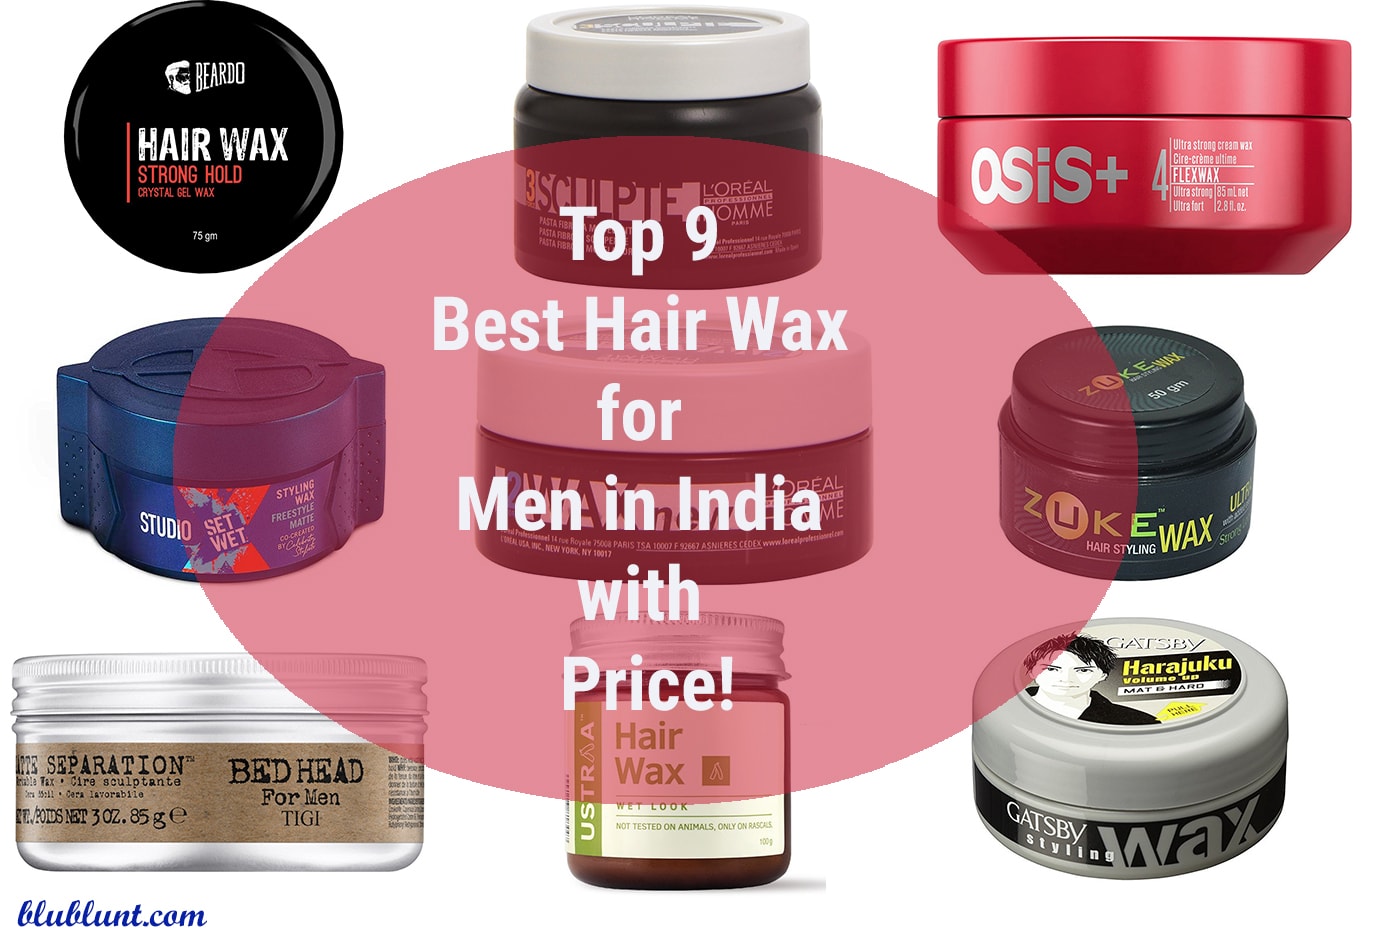 top-9-best-hair-wax-for-men-in-india-with-price-blublunt-reviews-.jpg